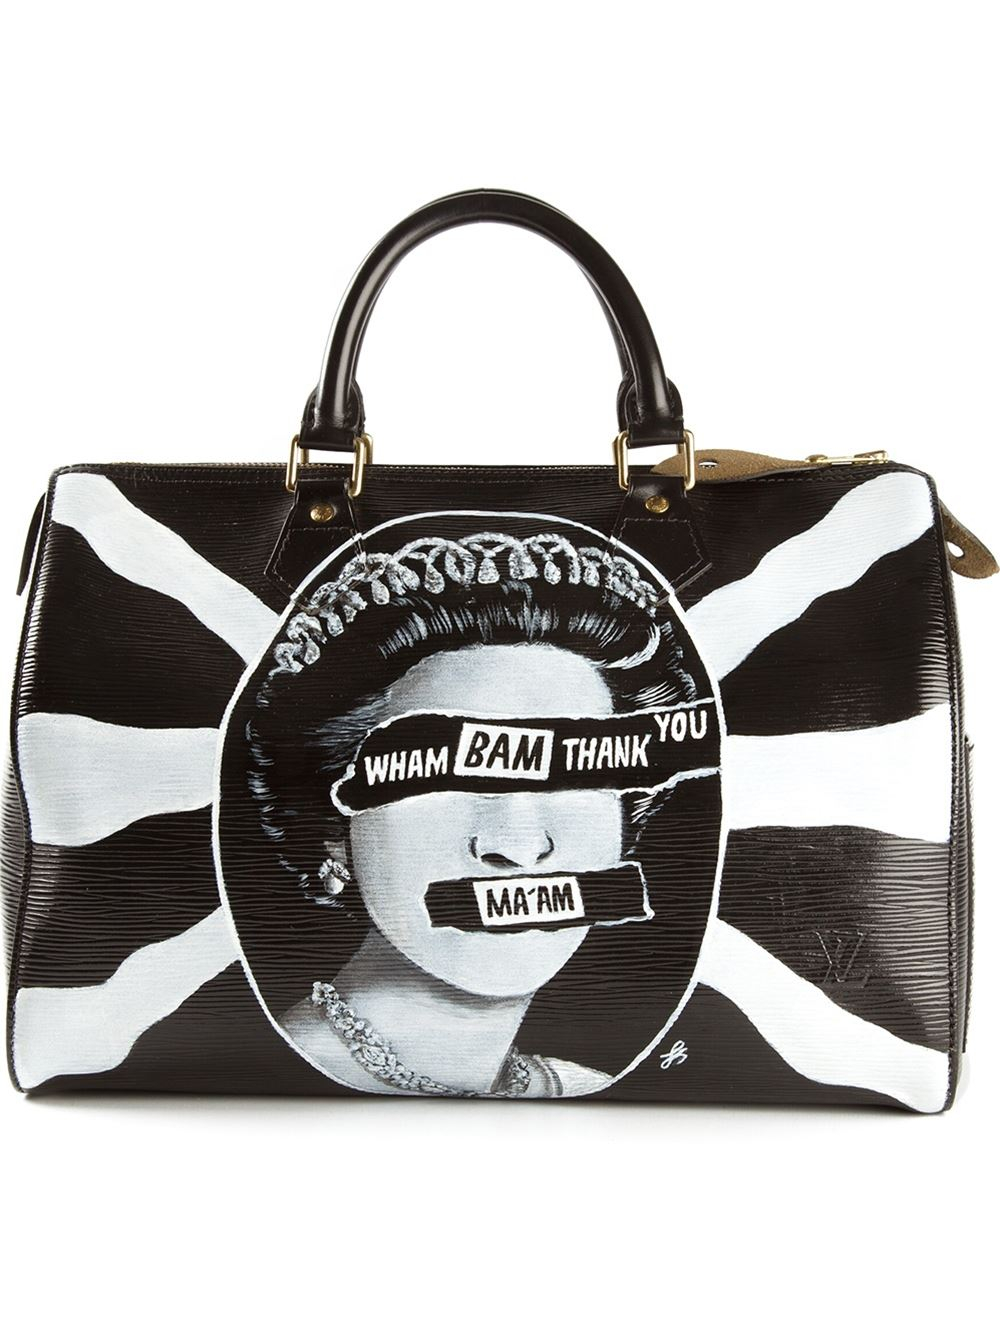 Lyst - Louis Vuitton Union Jack Printed Bowling Bag in Black